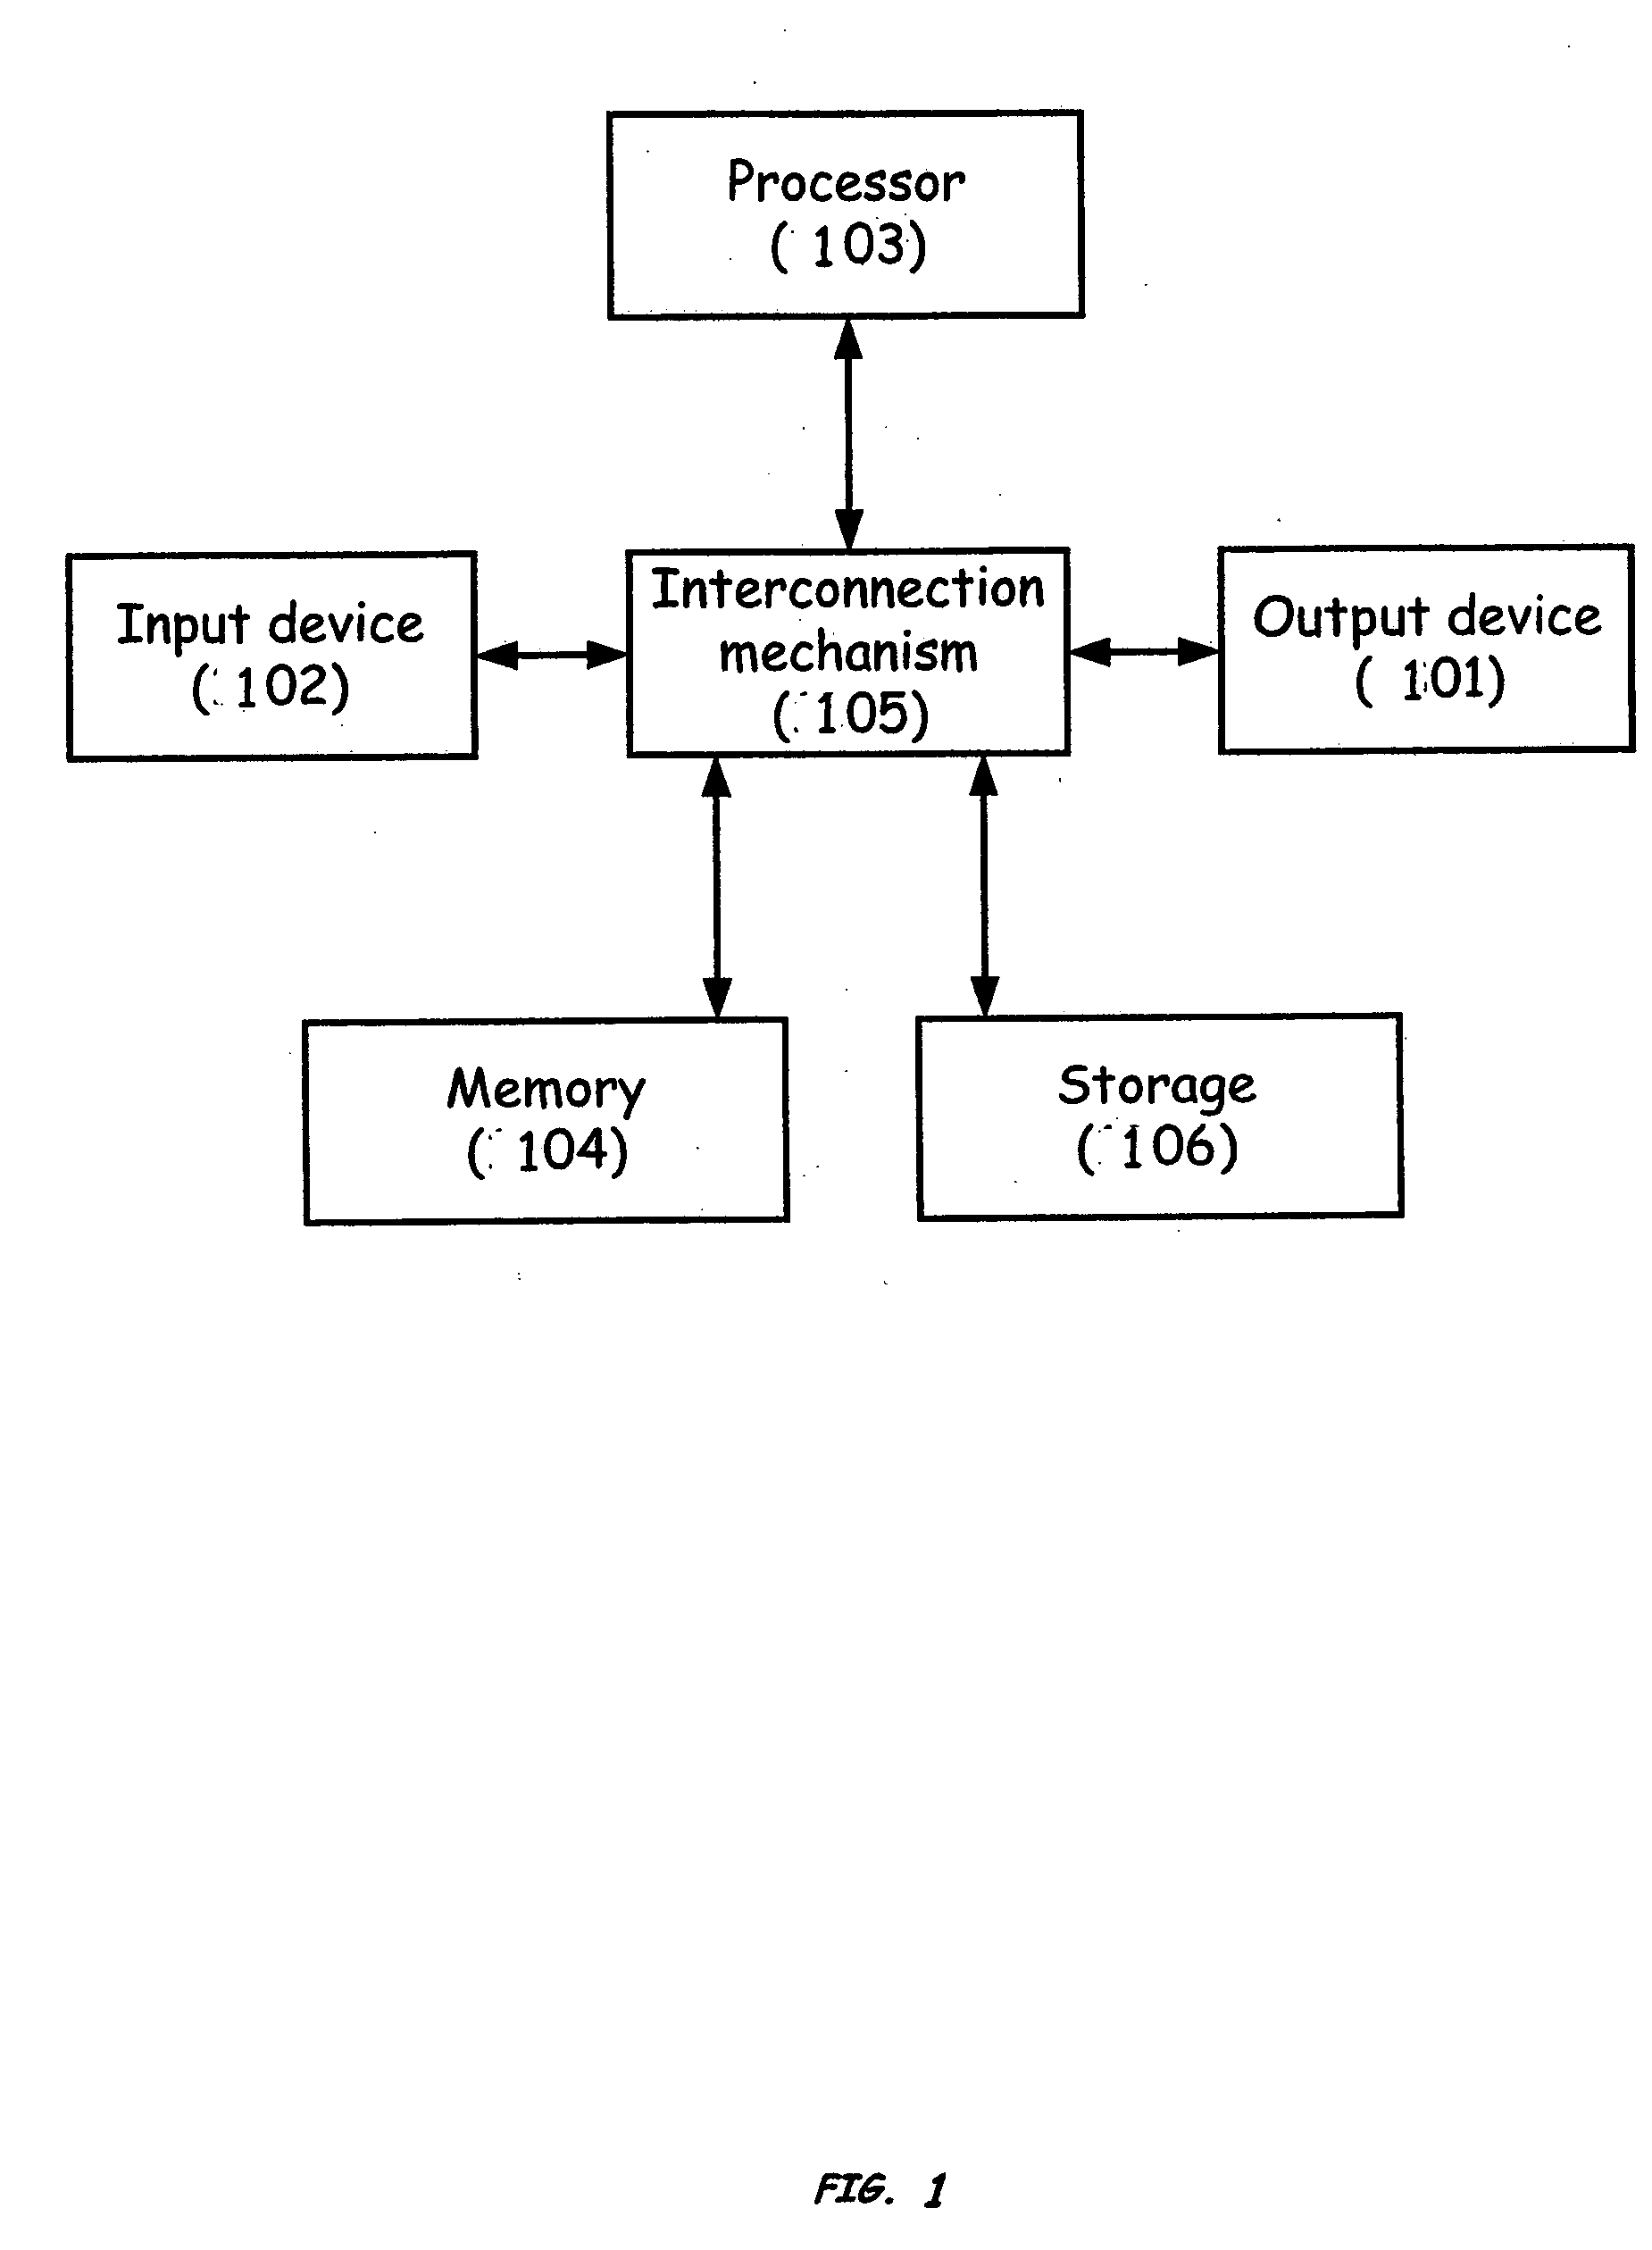 Method and apparatus for communicating data between two hosts